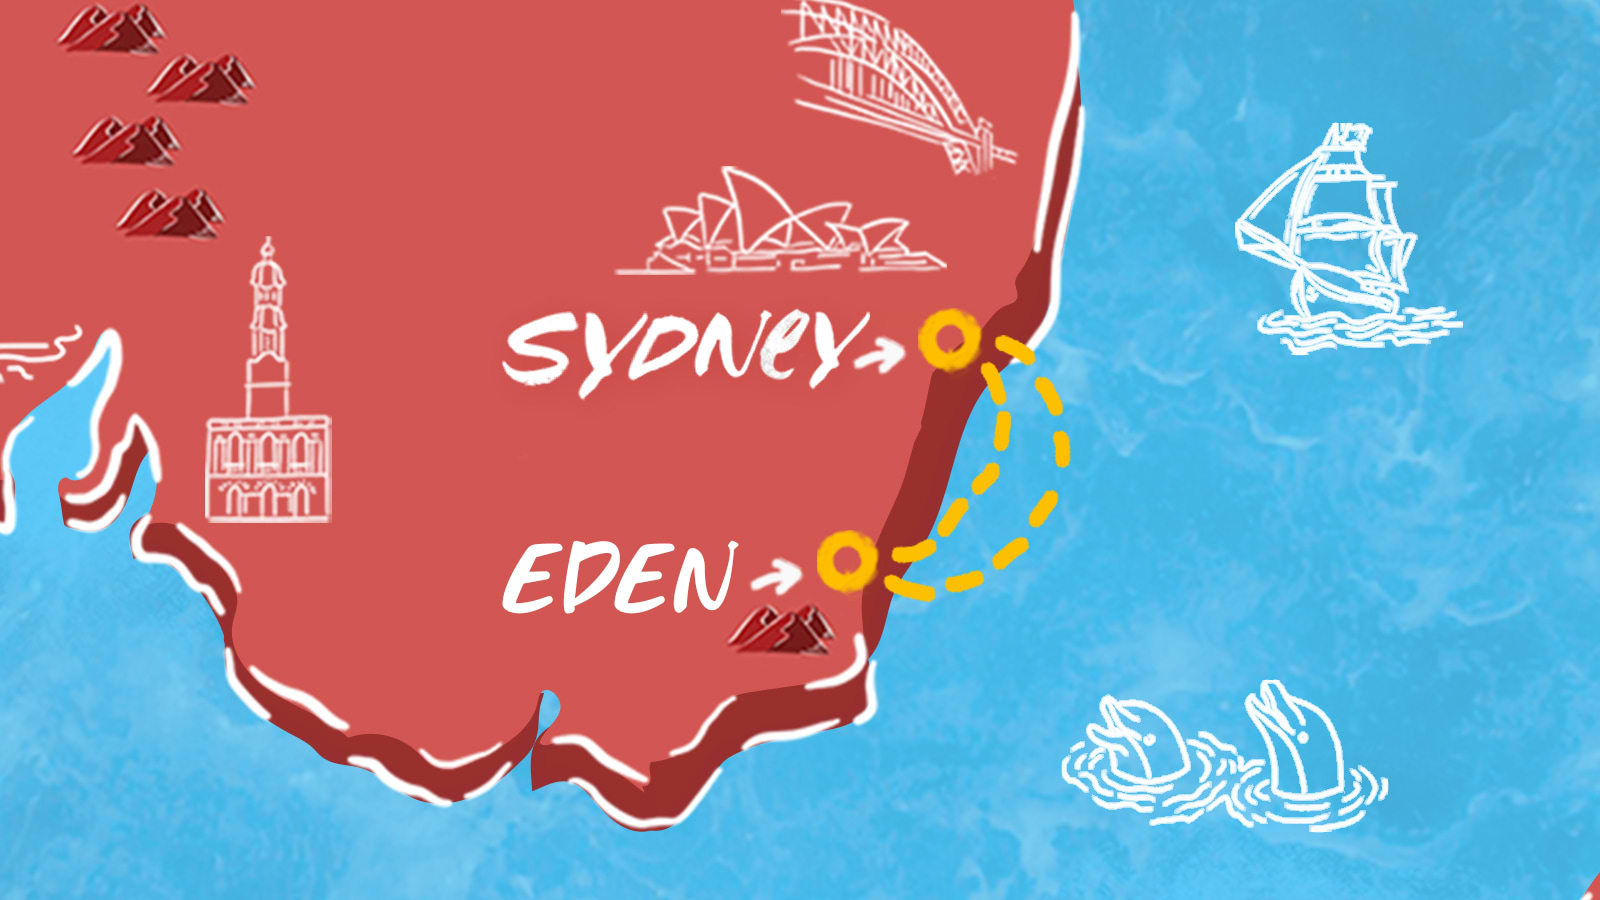 Map of Eden Explorer: From Sydney to Eden itinerary